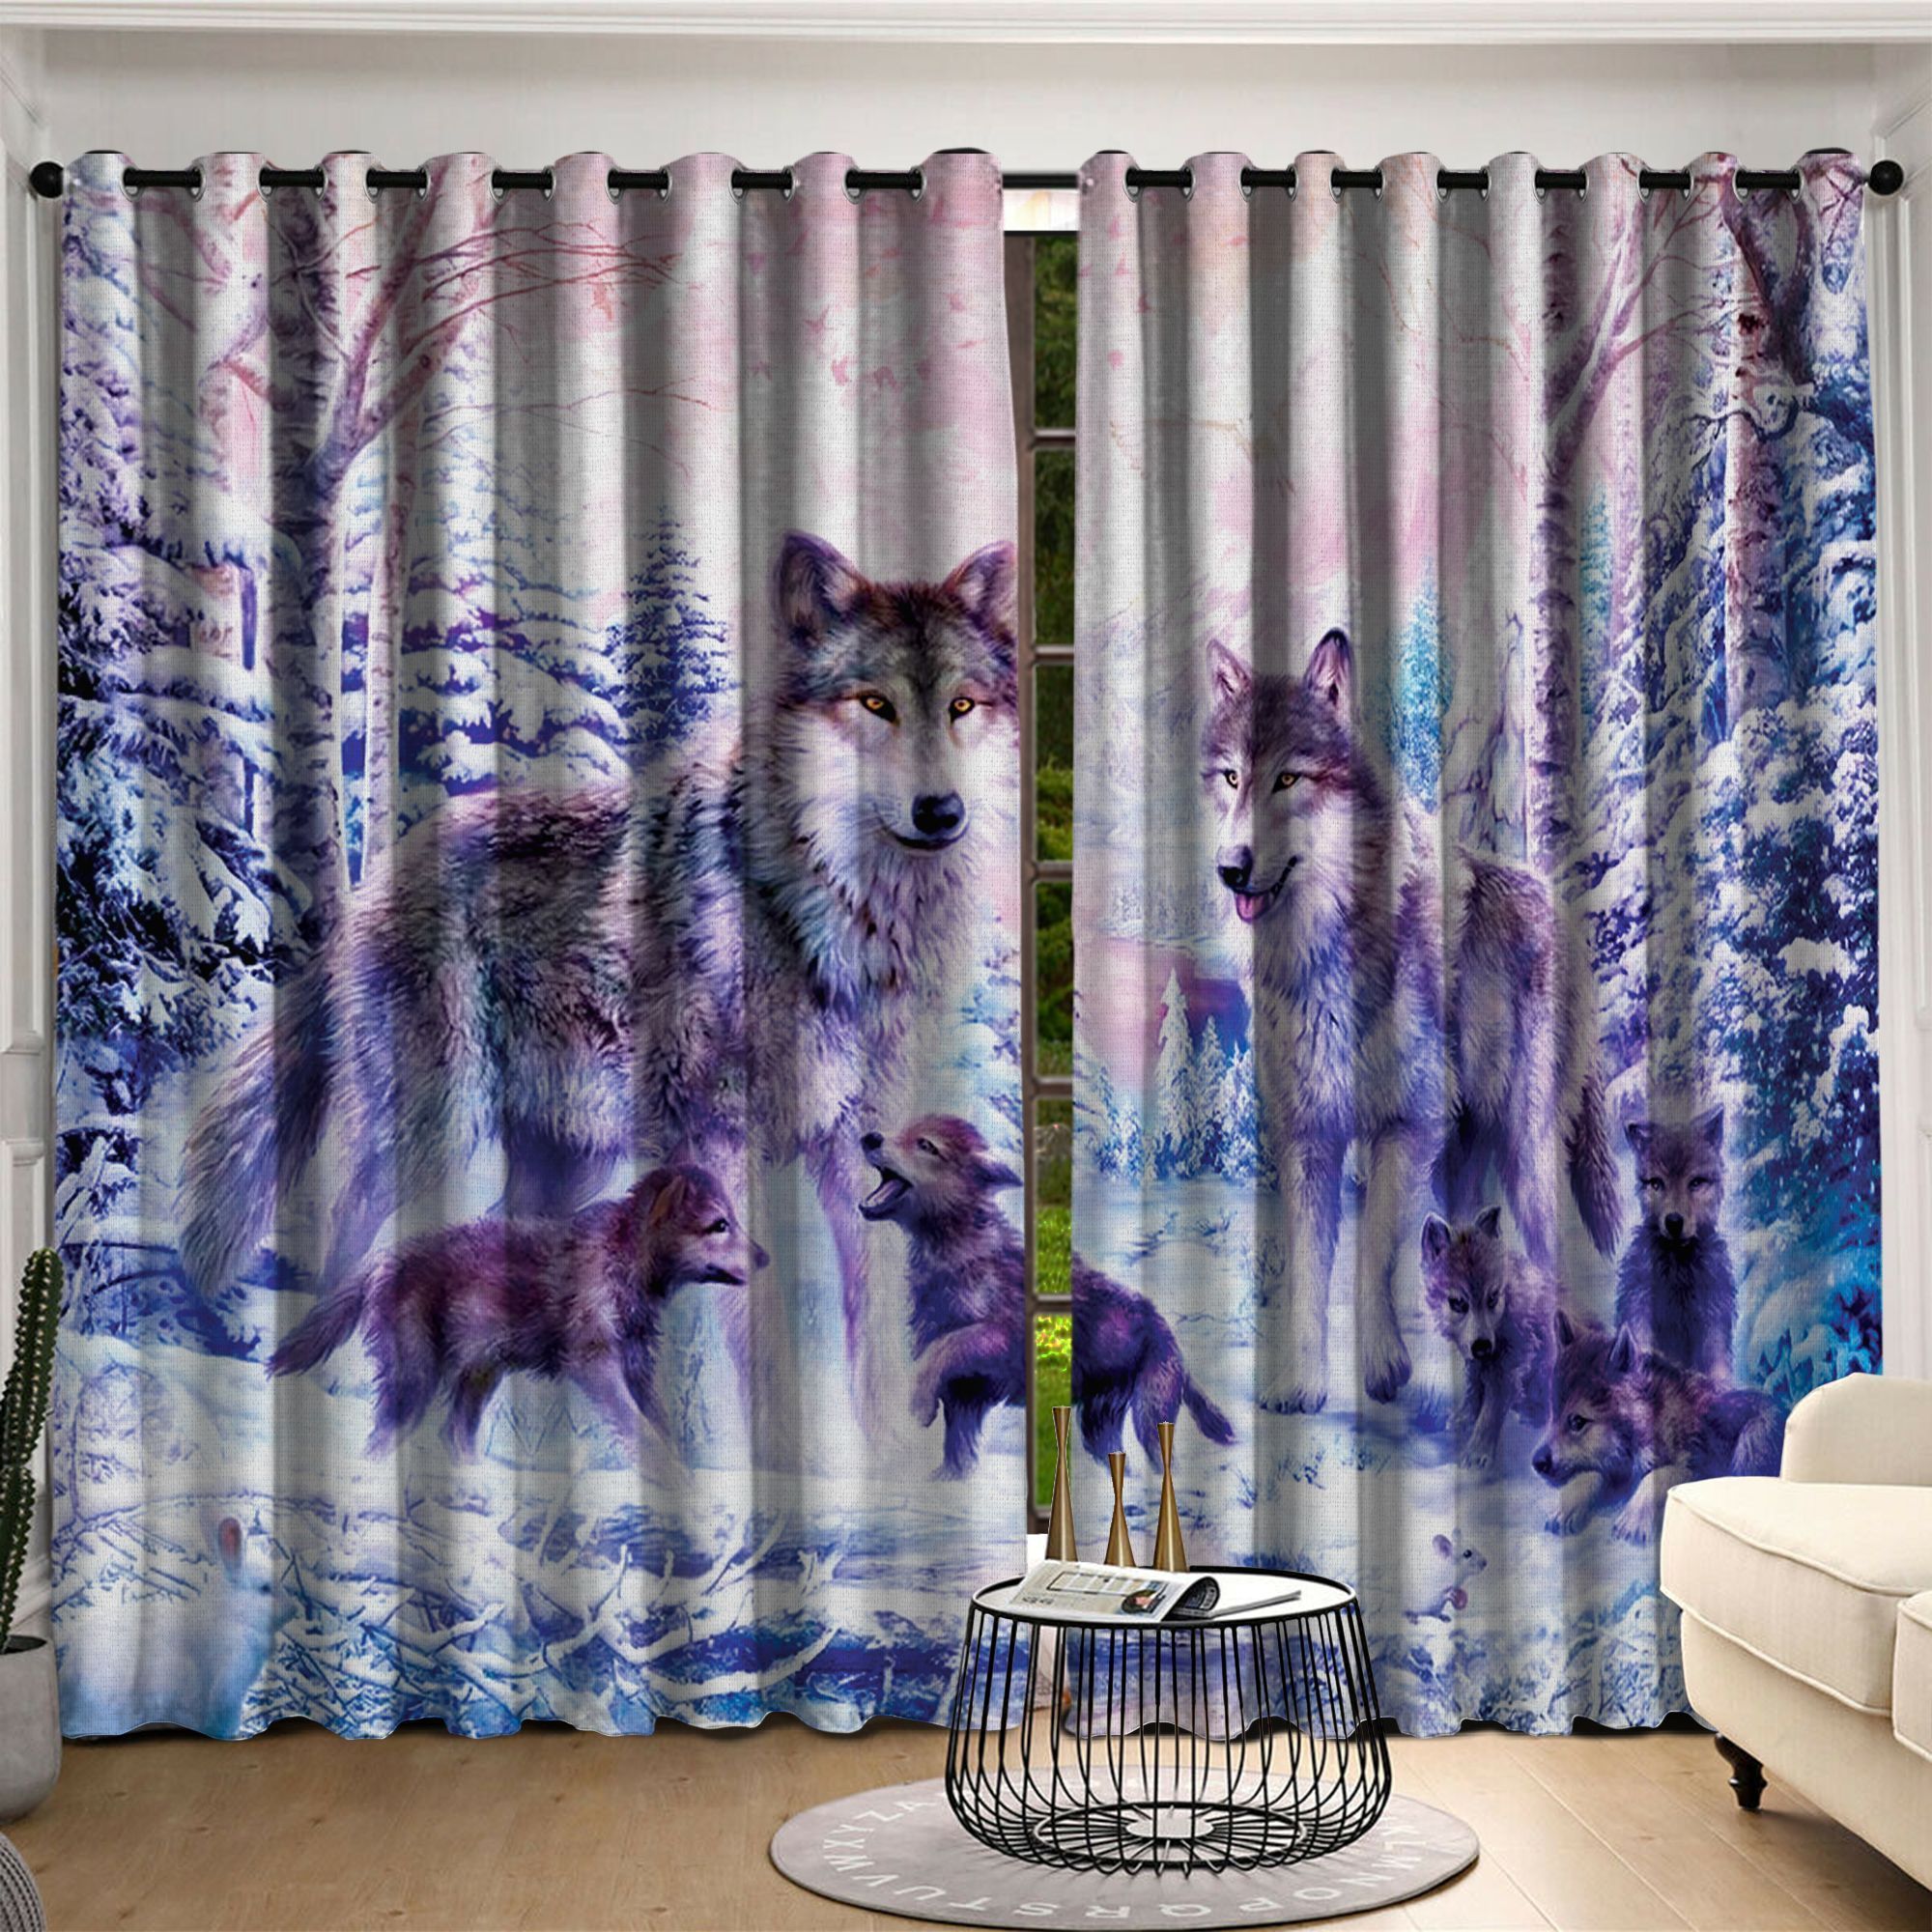 Wolf Family Printed Window Curtain Home Decor